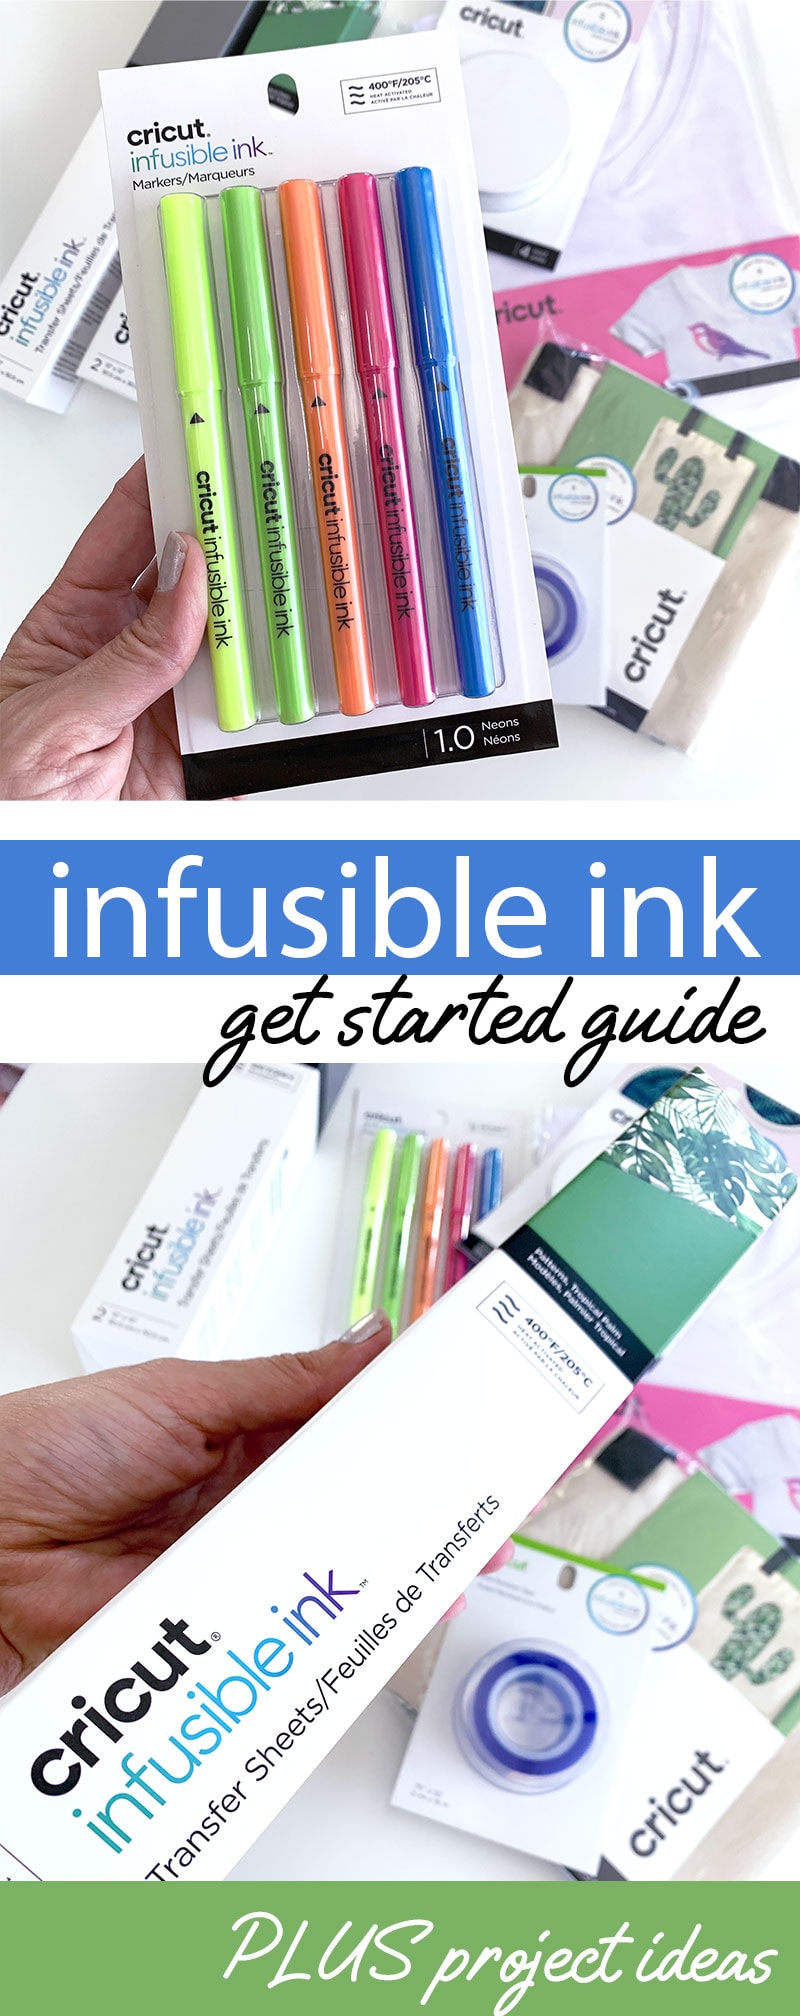 Infusible Ink get started guide